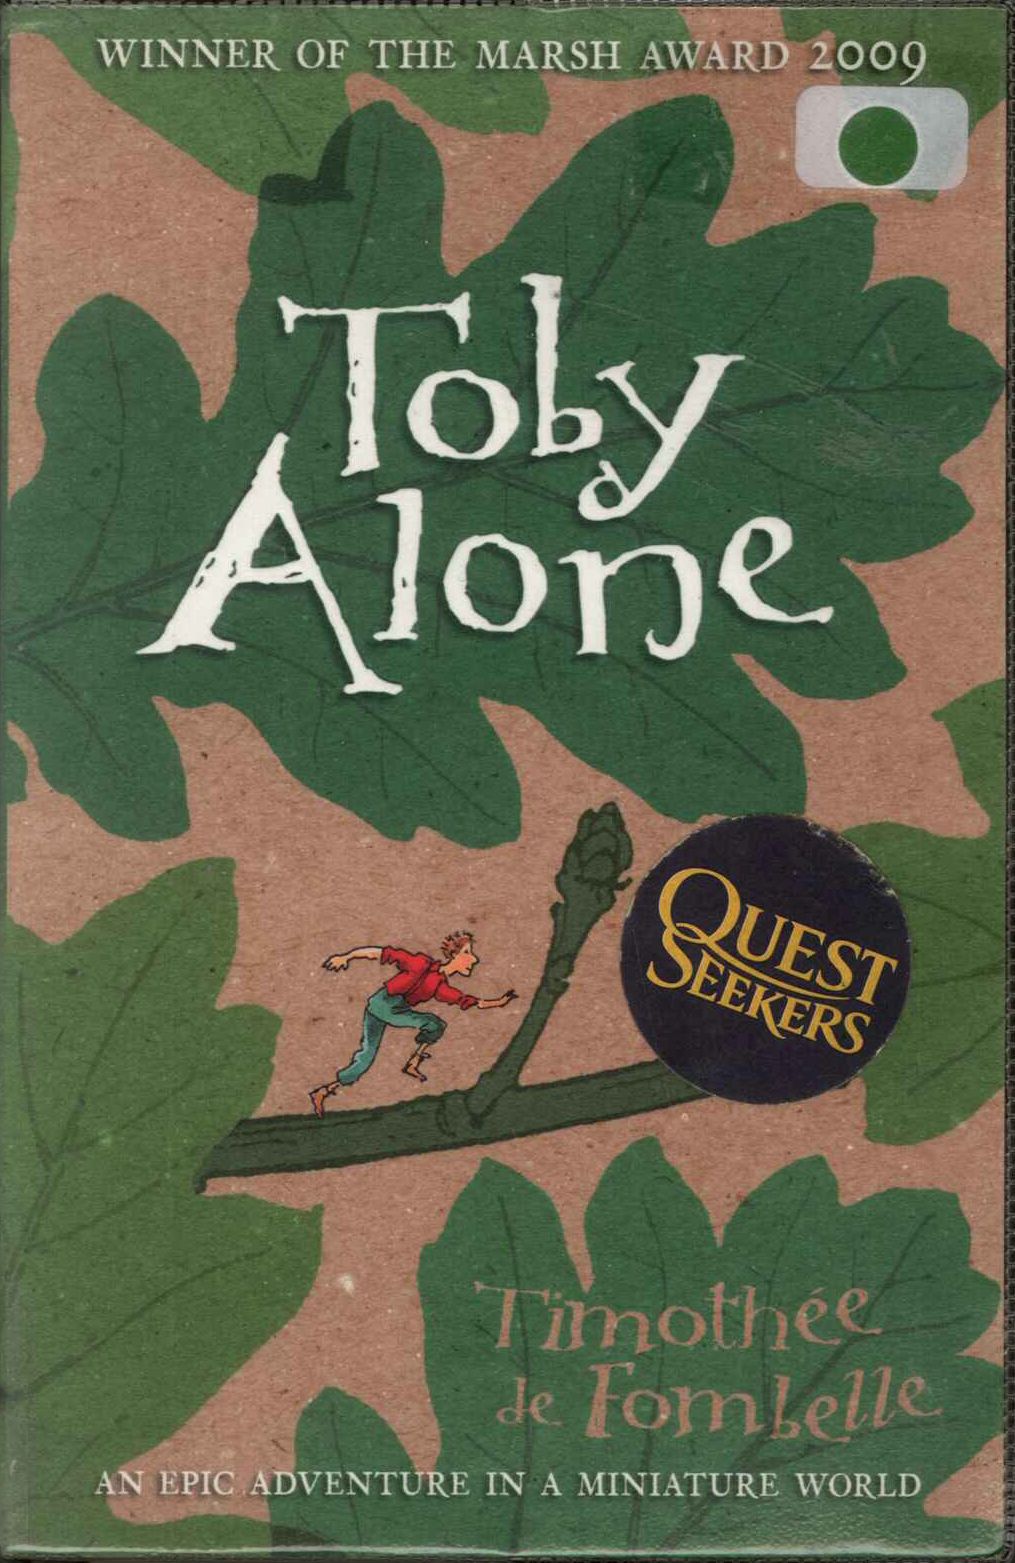 Toby alone